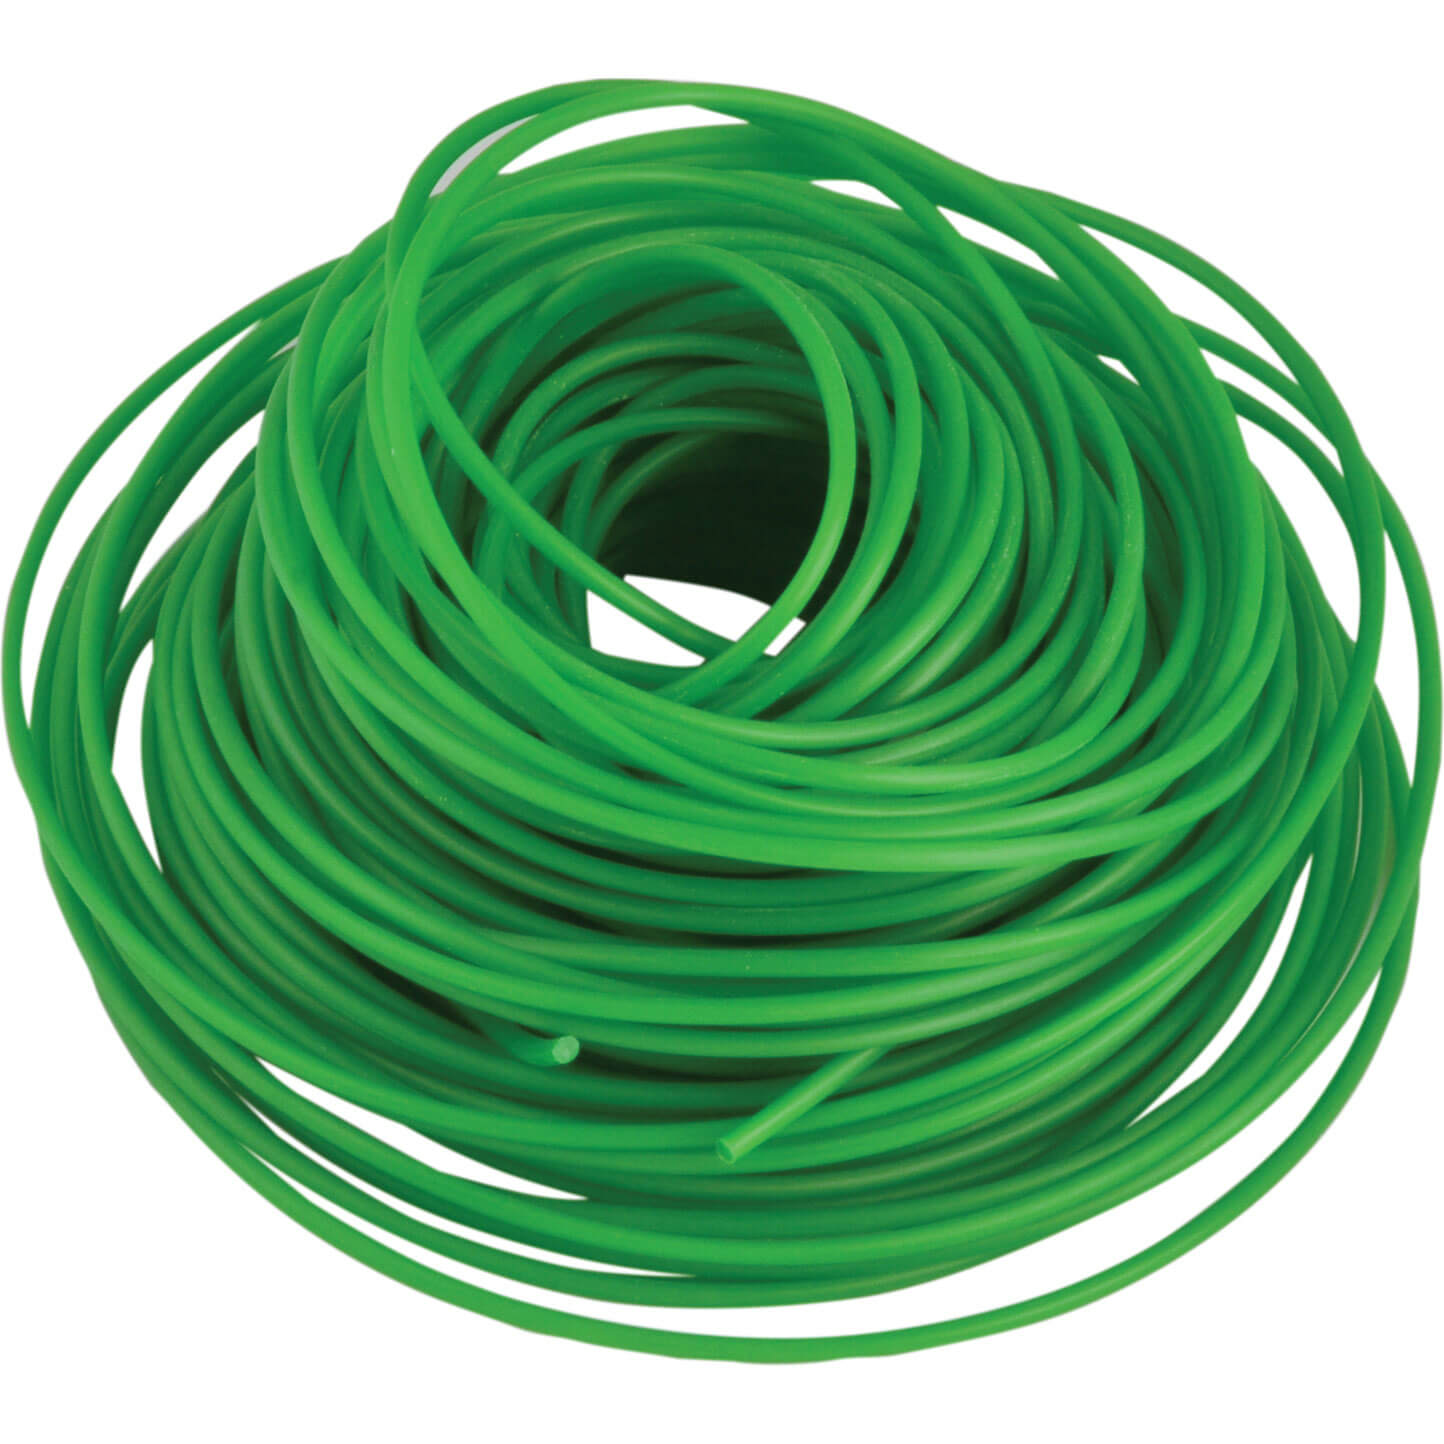 Image of ALM Trimmer Line 2mm x 20m for Grass Trimmers Pack of 1